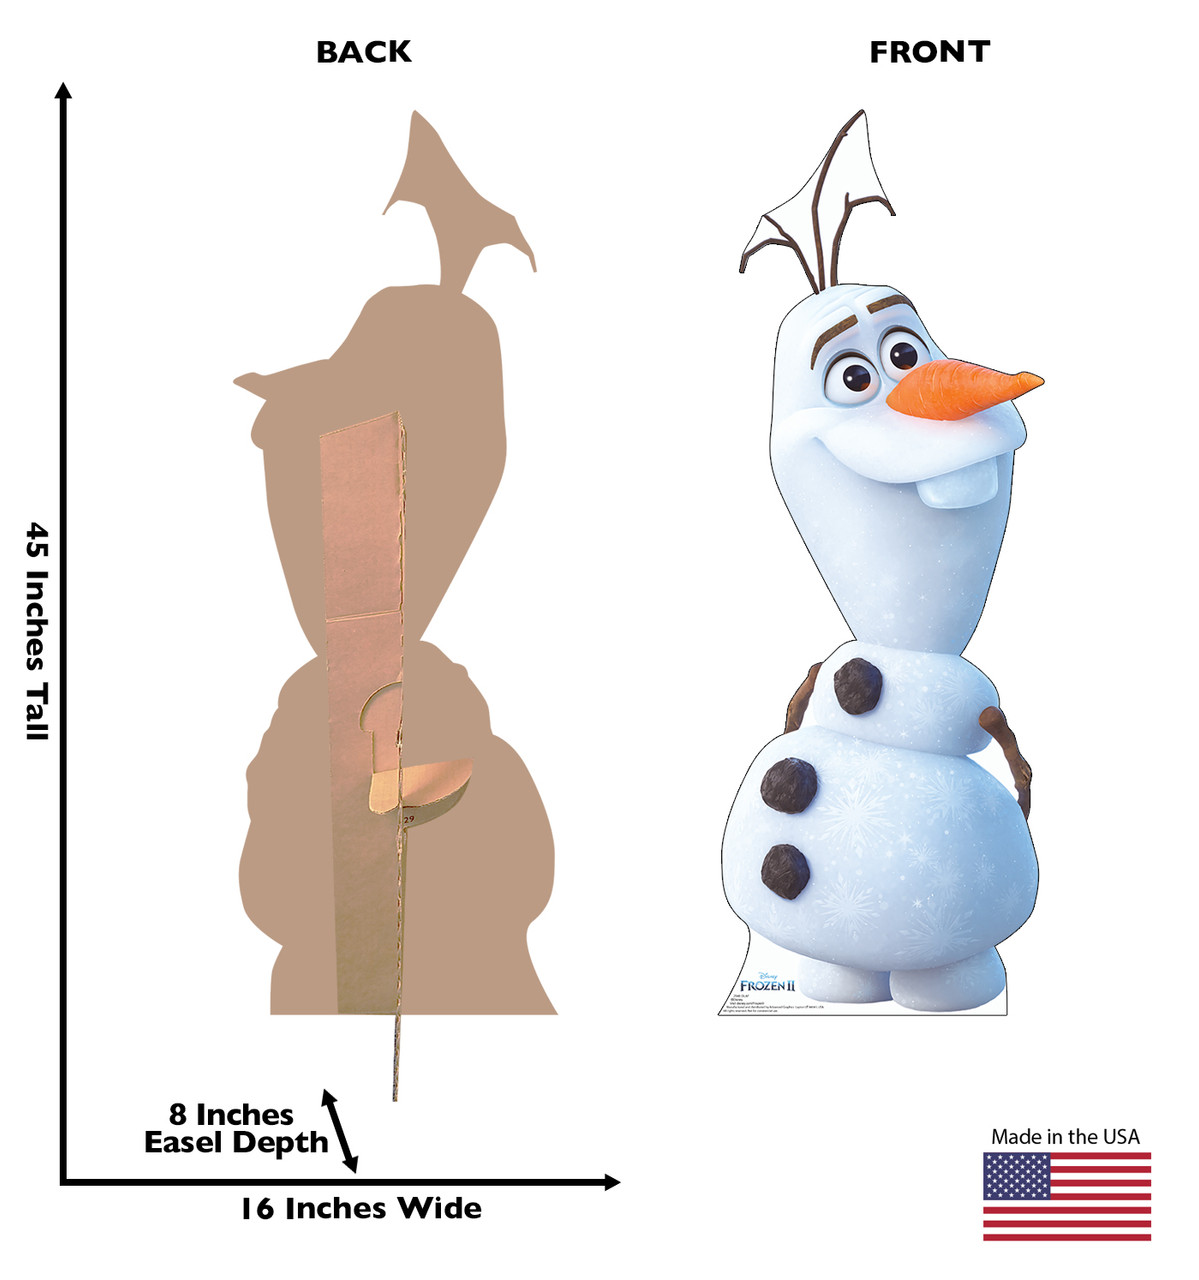 Life-size cardboard standee of Olaf from Disney's Frozen 2) with back and front dimensions.